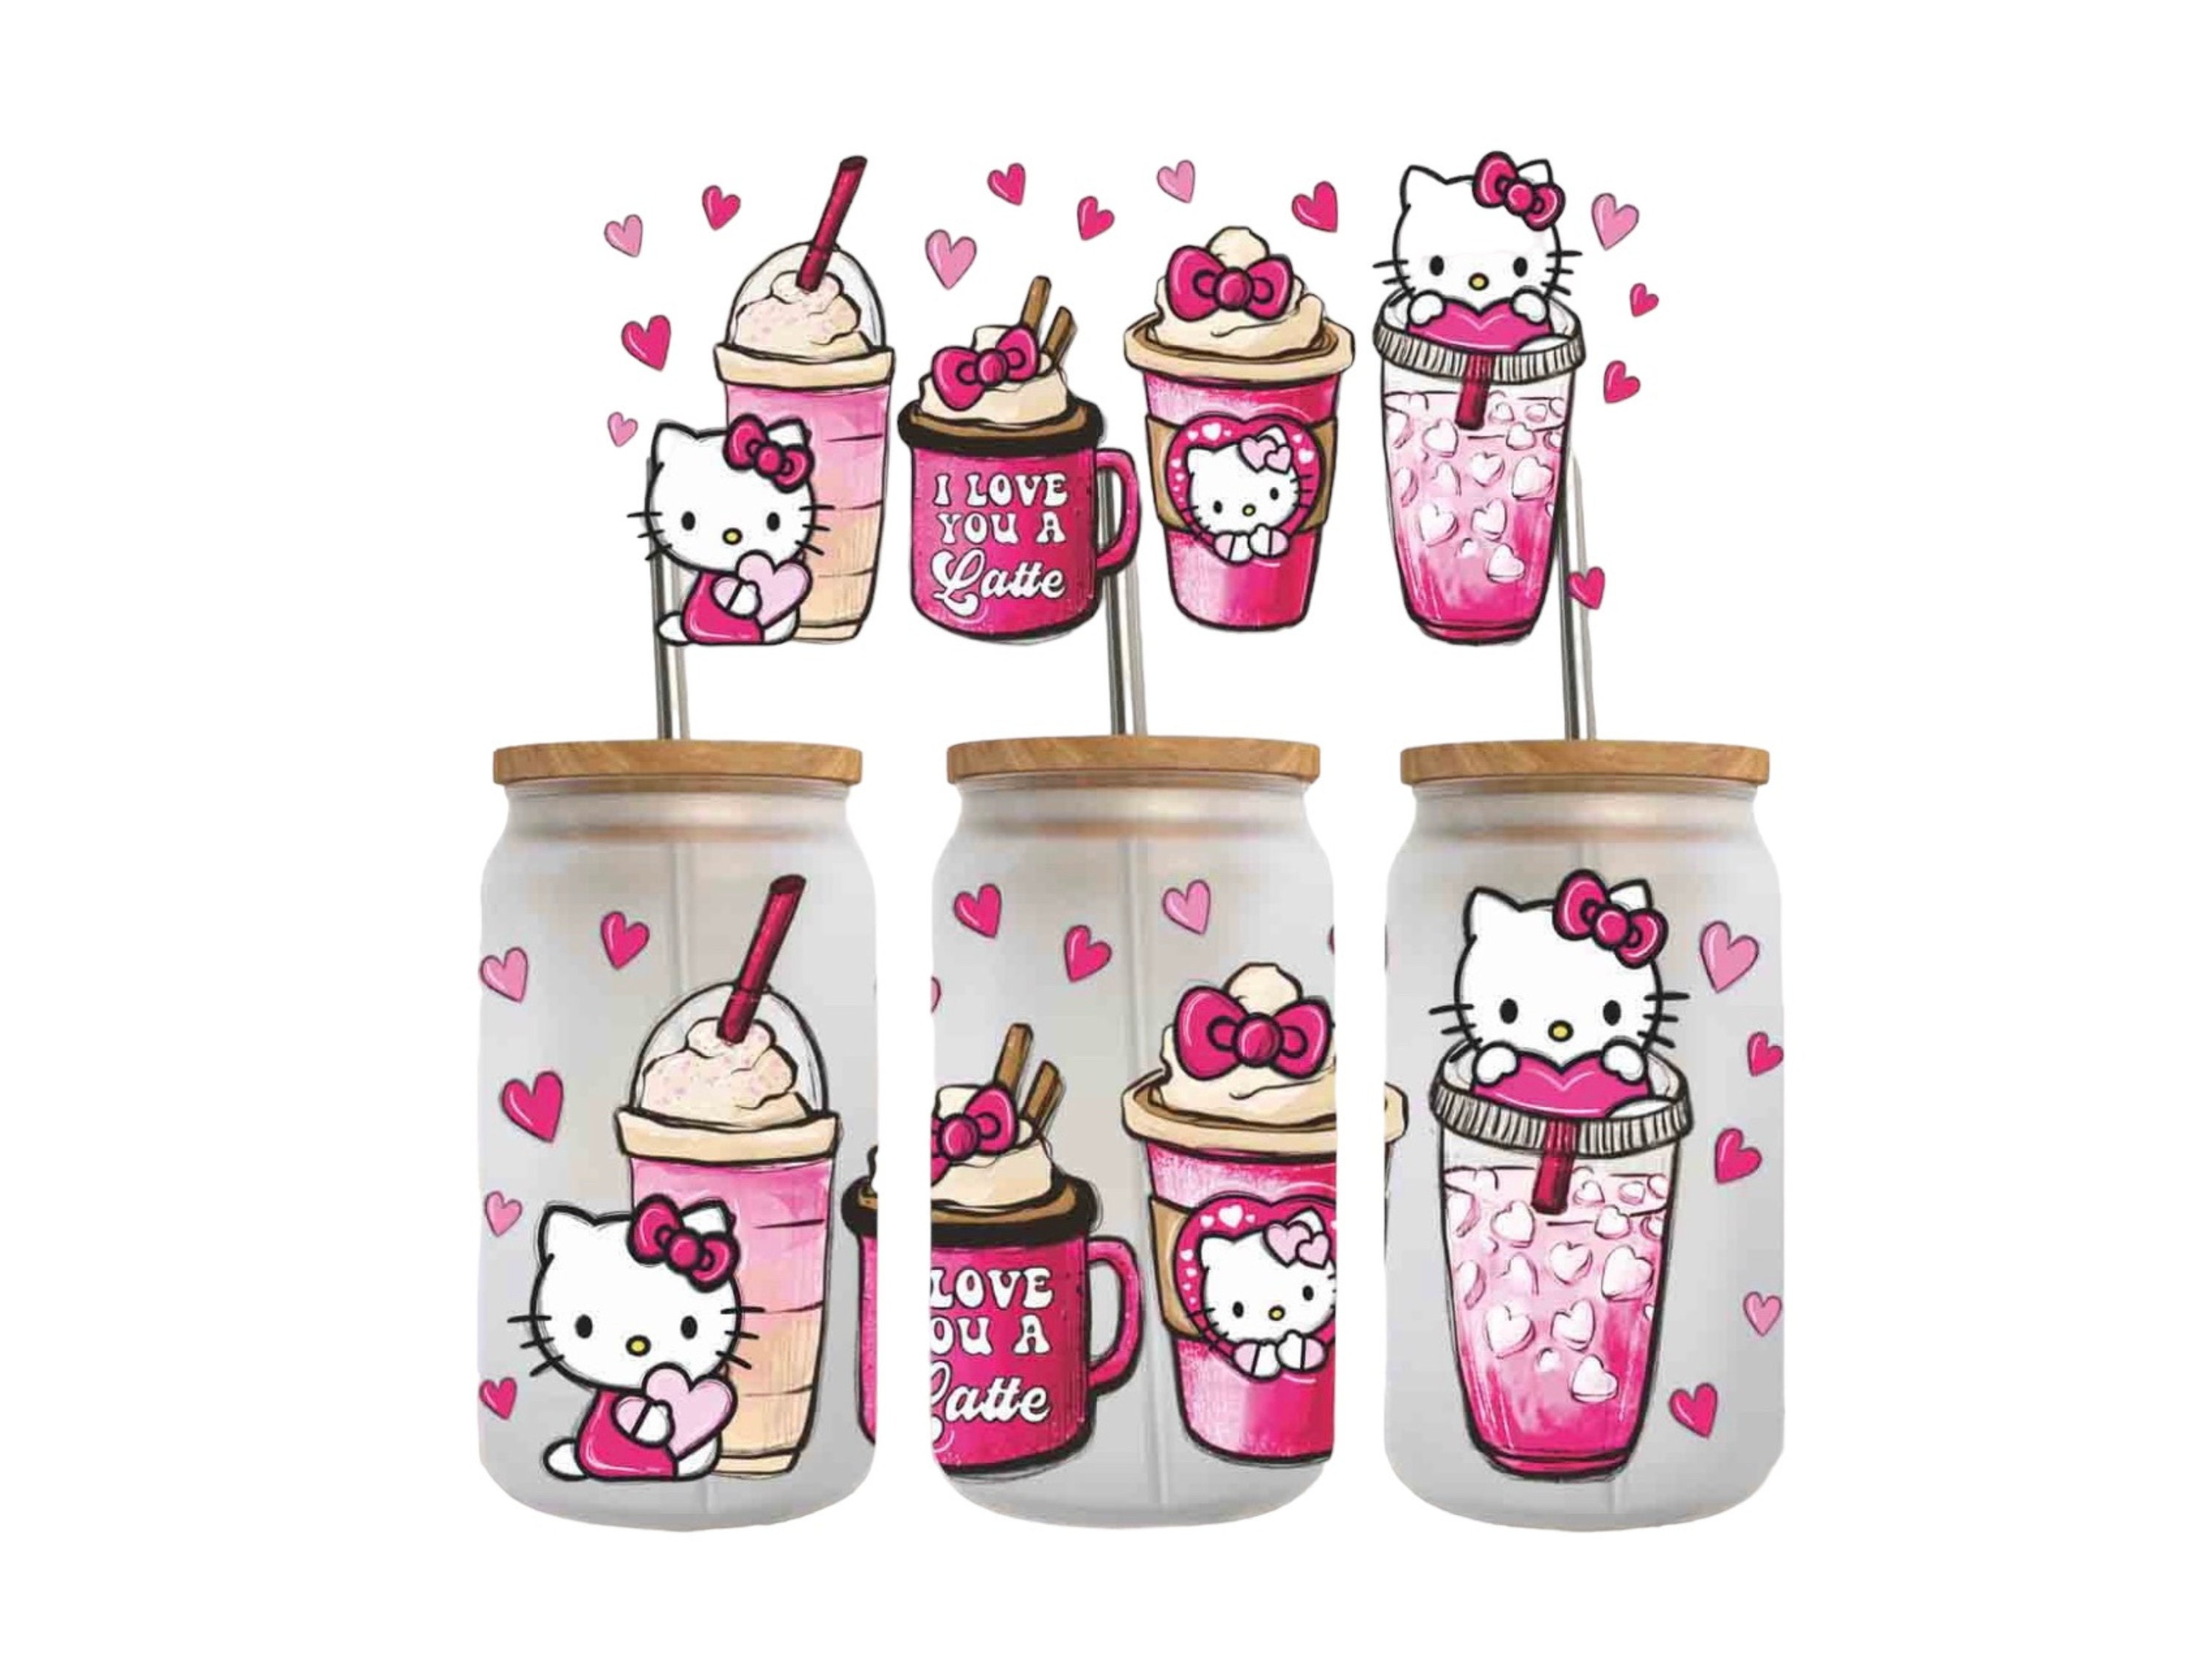 HELLO KITTY-16 0Z.-UV DTF CUP WRAP *rts – MarCourt Transfers